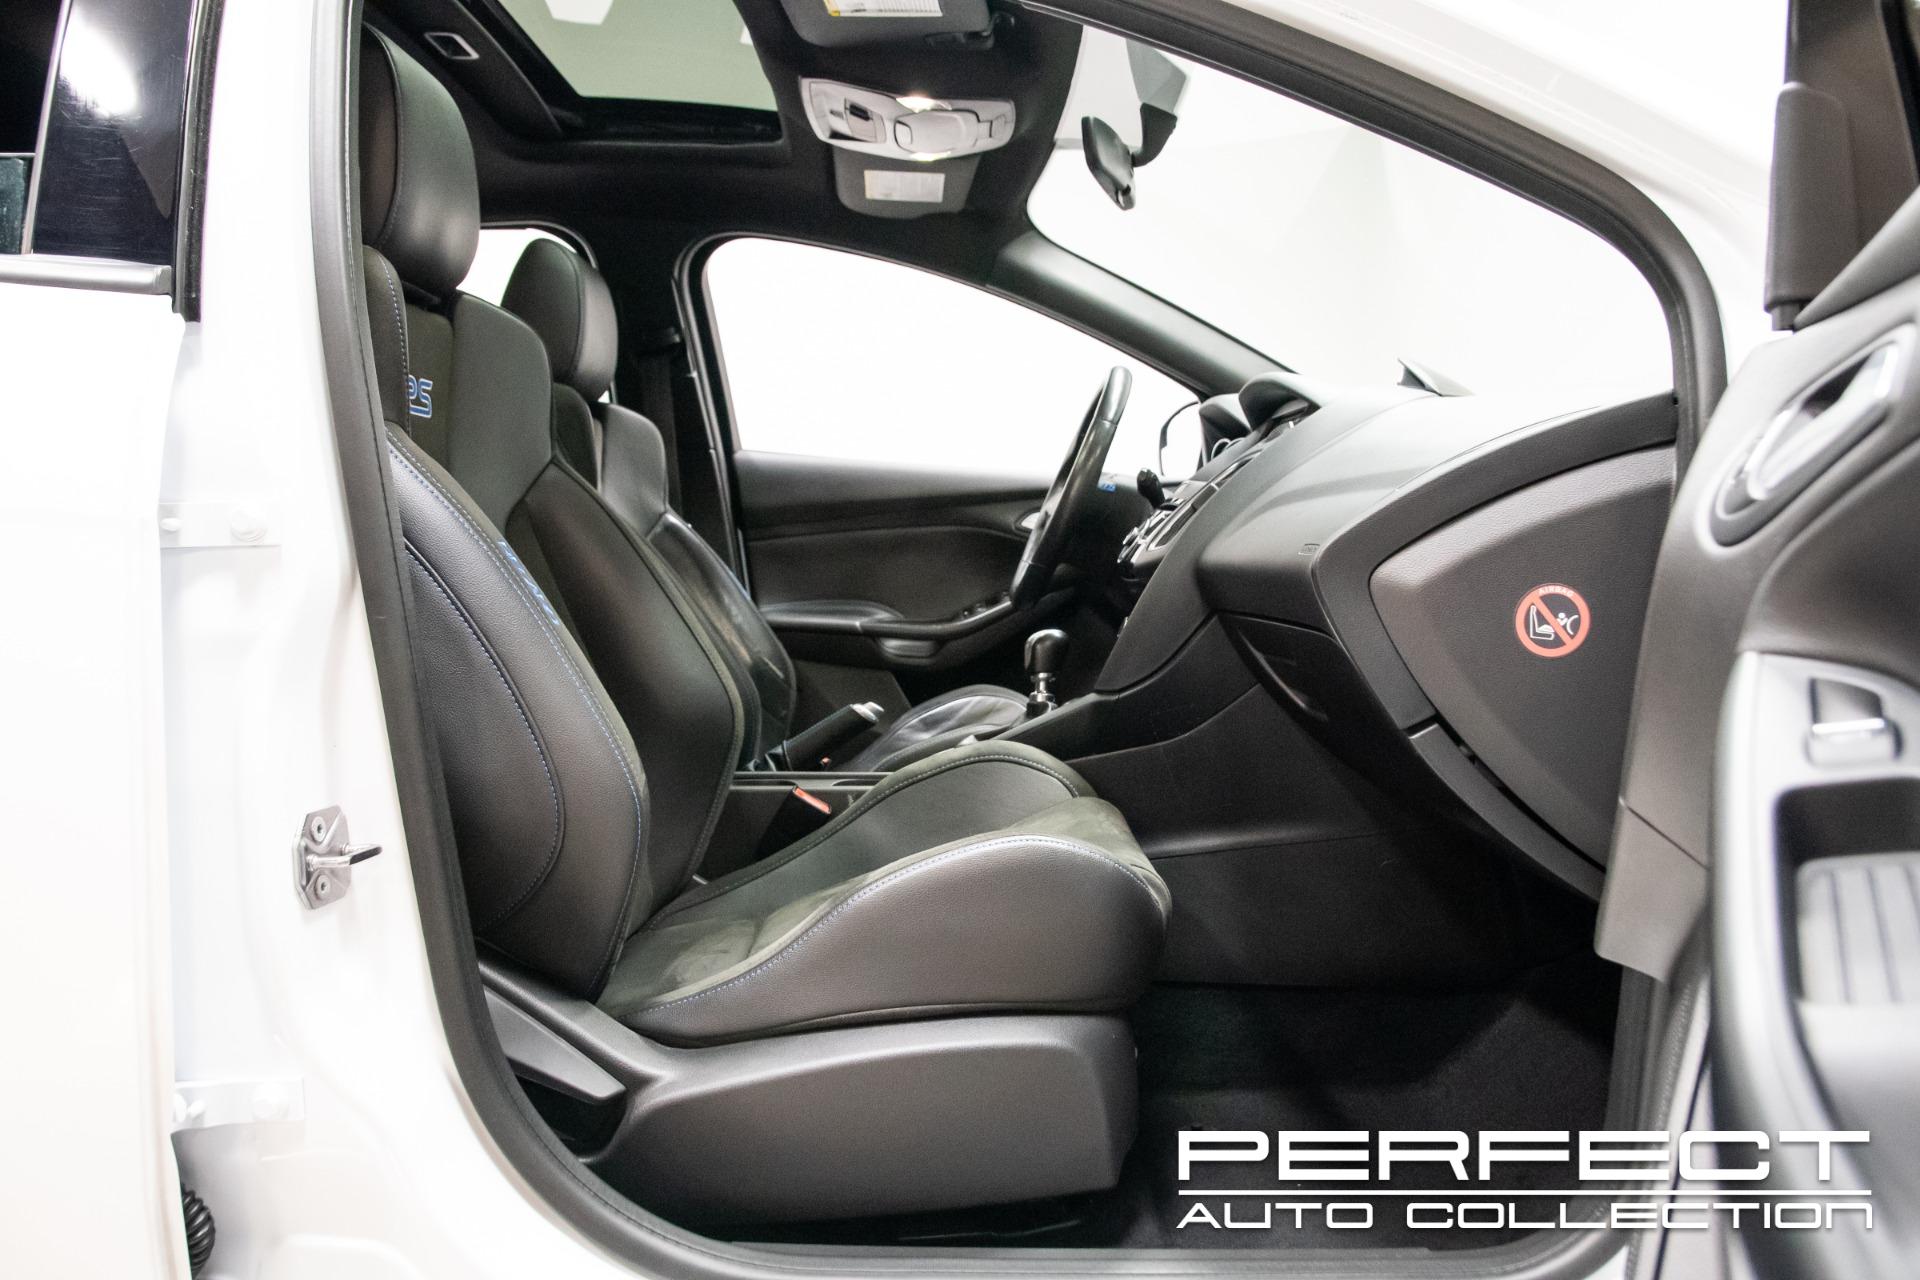 Hide N Seat Auto Interiors - Ford Focus RS Mk2 interior trimmed in